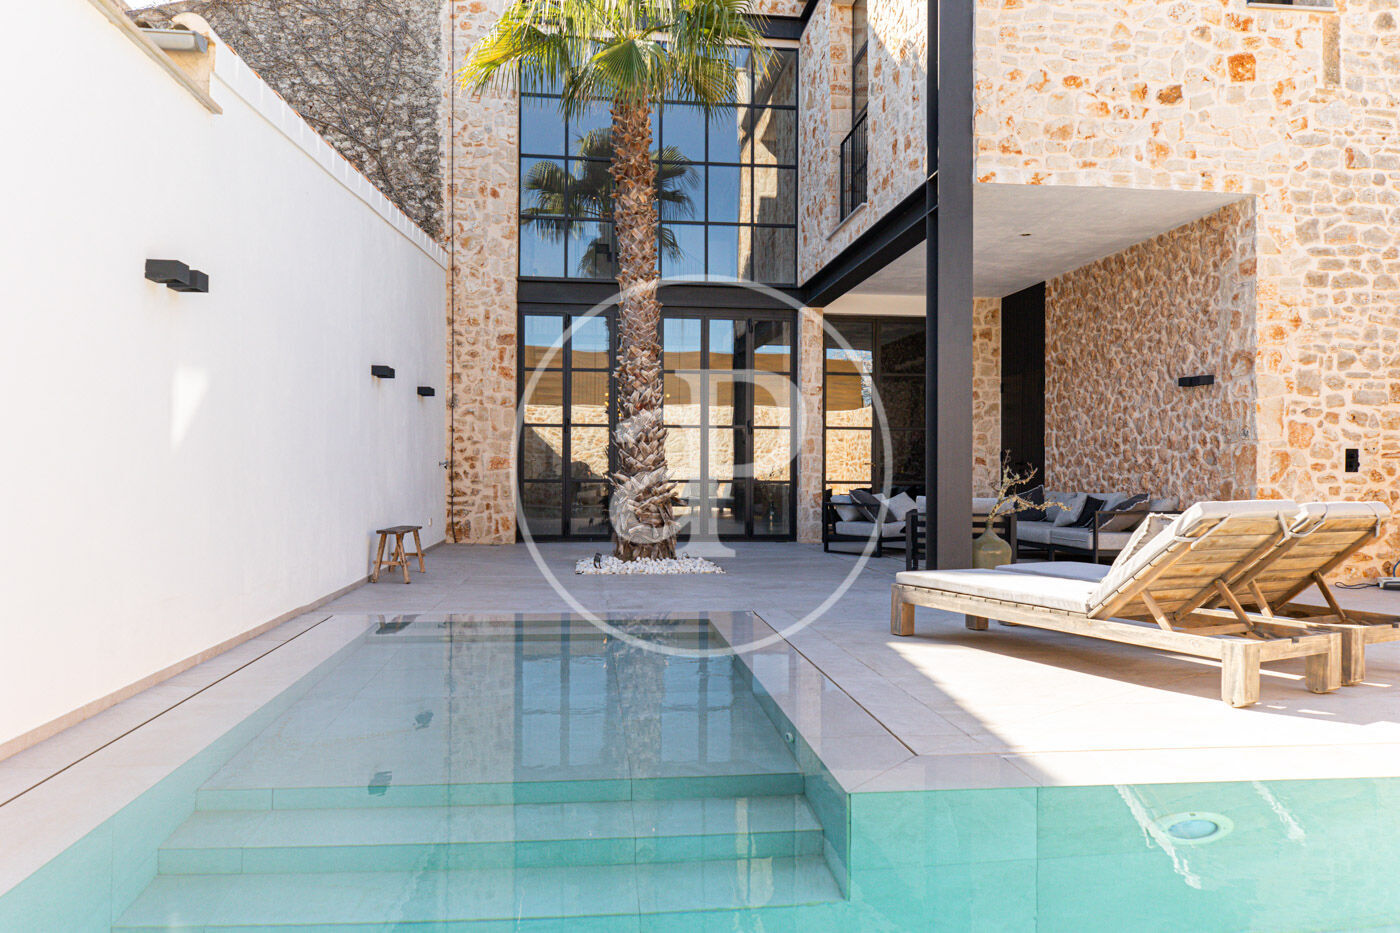 Exclusive Luxury Village House for Sale with Pool and Terrace in Santanyí, Mallorca